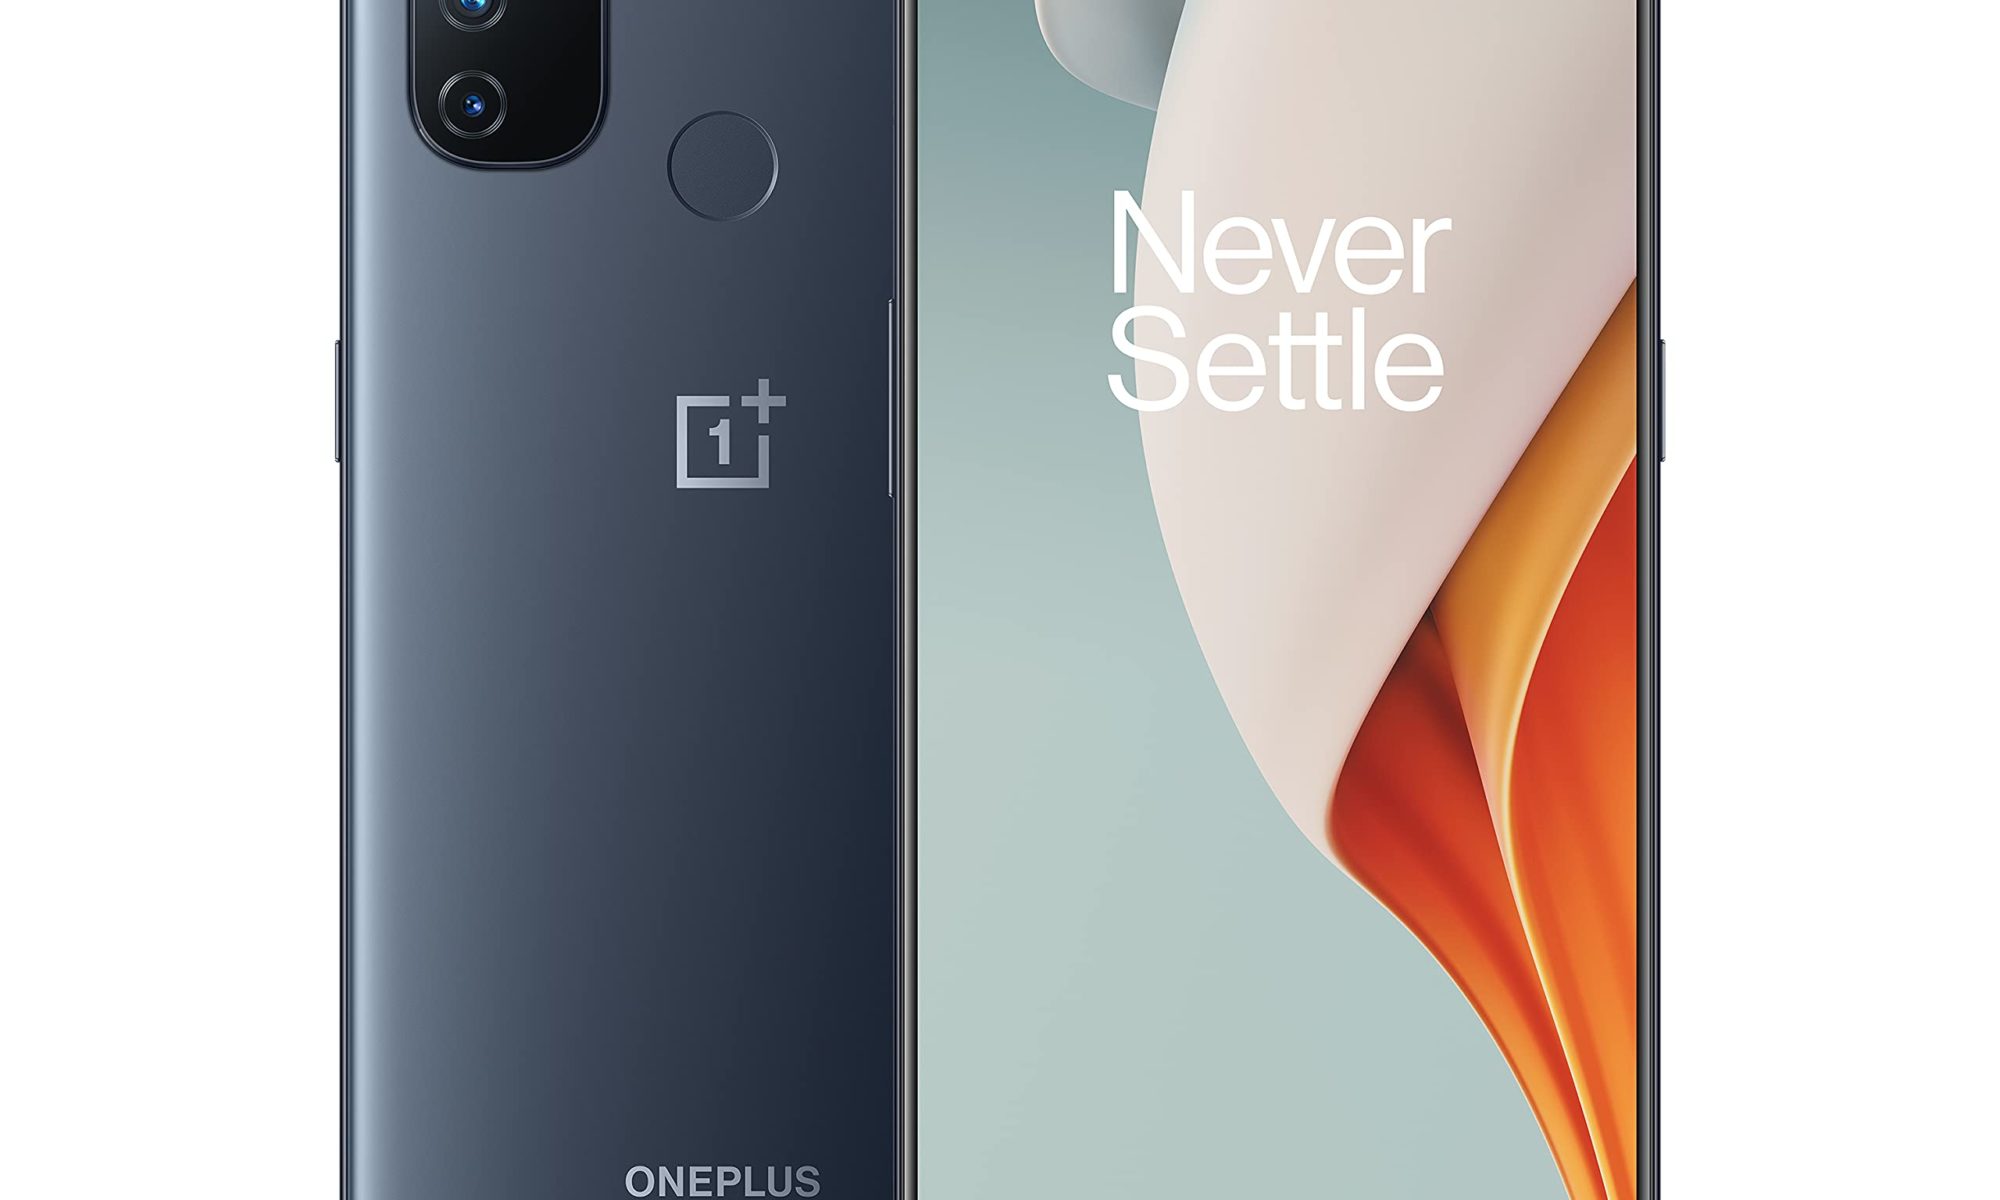 OnePlus phone picture "never Settle" text on phone